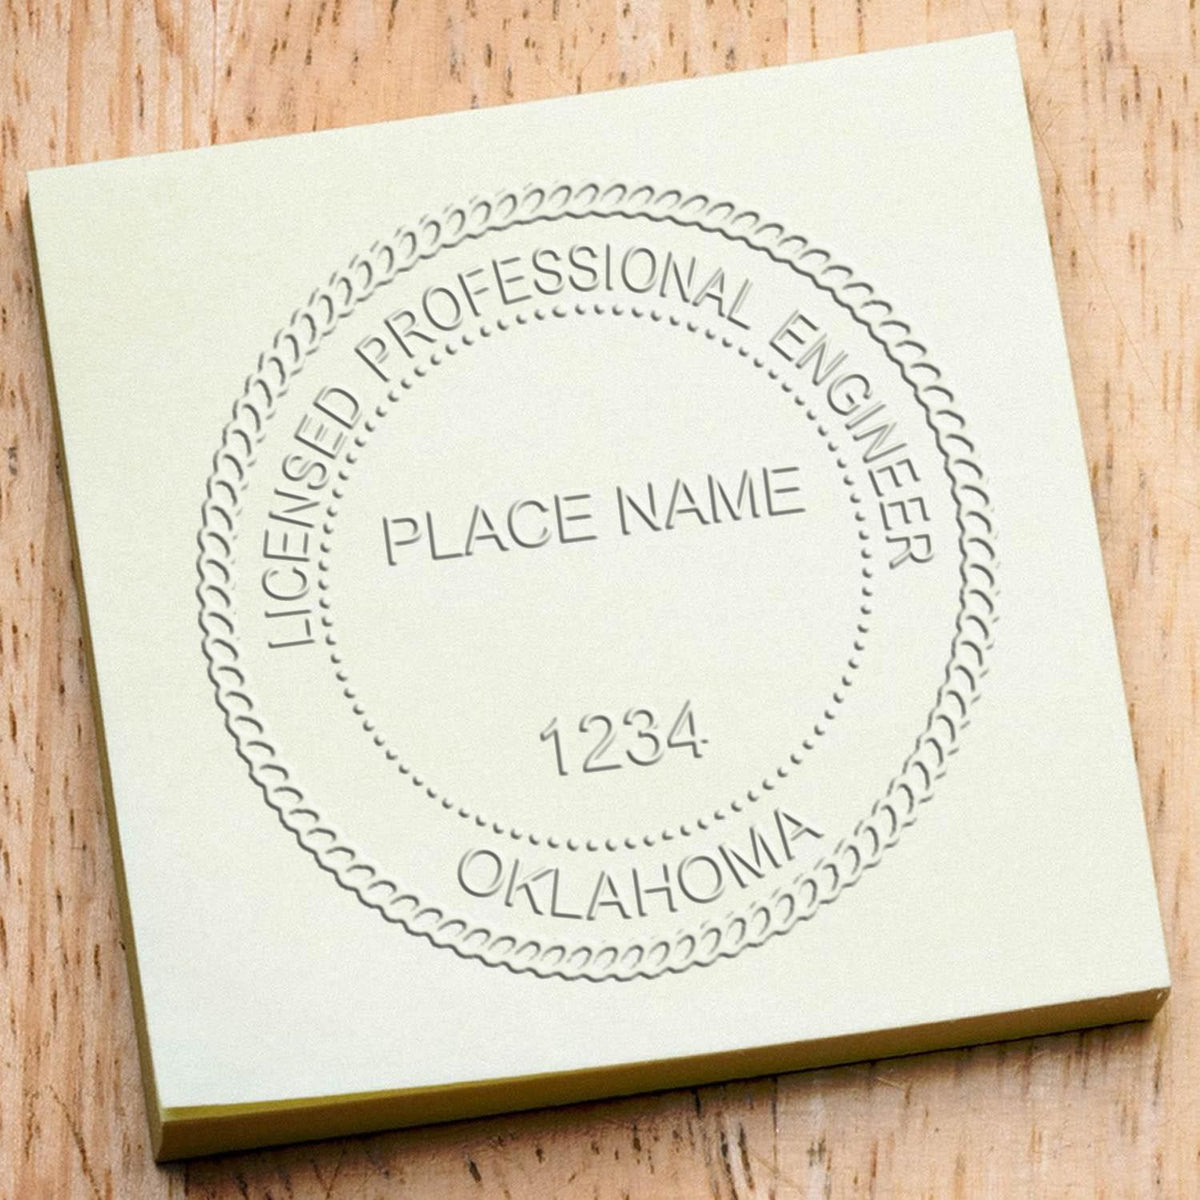 A photograph of the Hybrid Oklahoma Engineer Seal stamp impression reveals a vivid, professional image of the on paper.